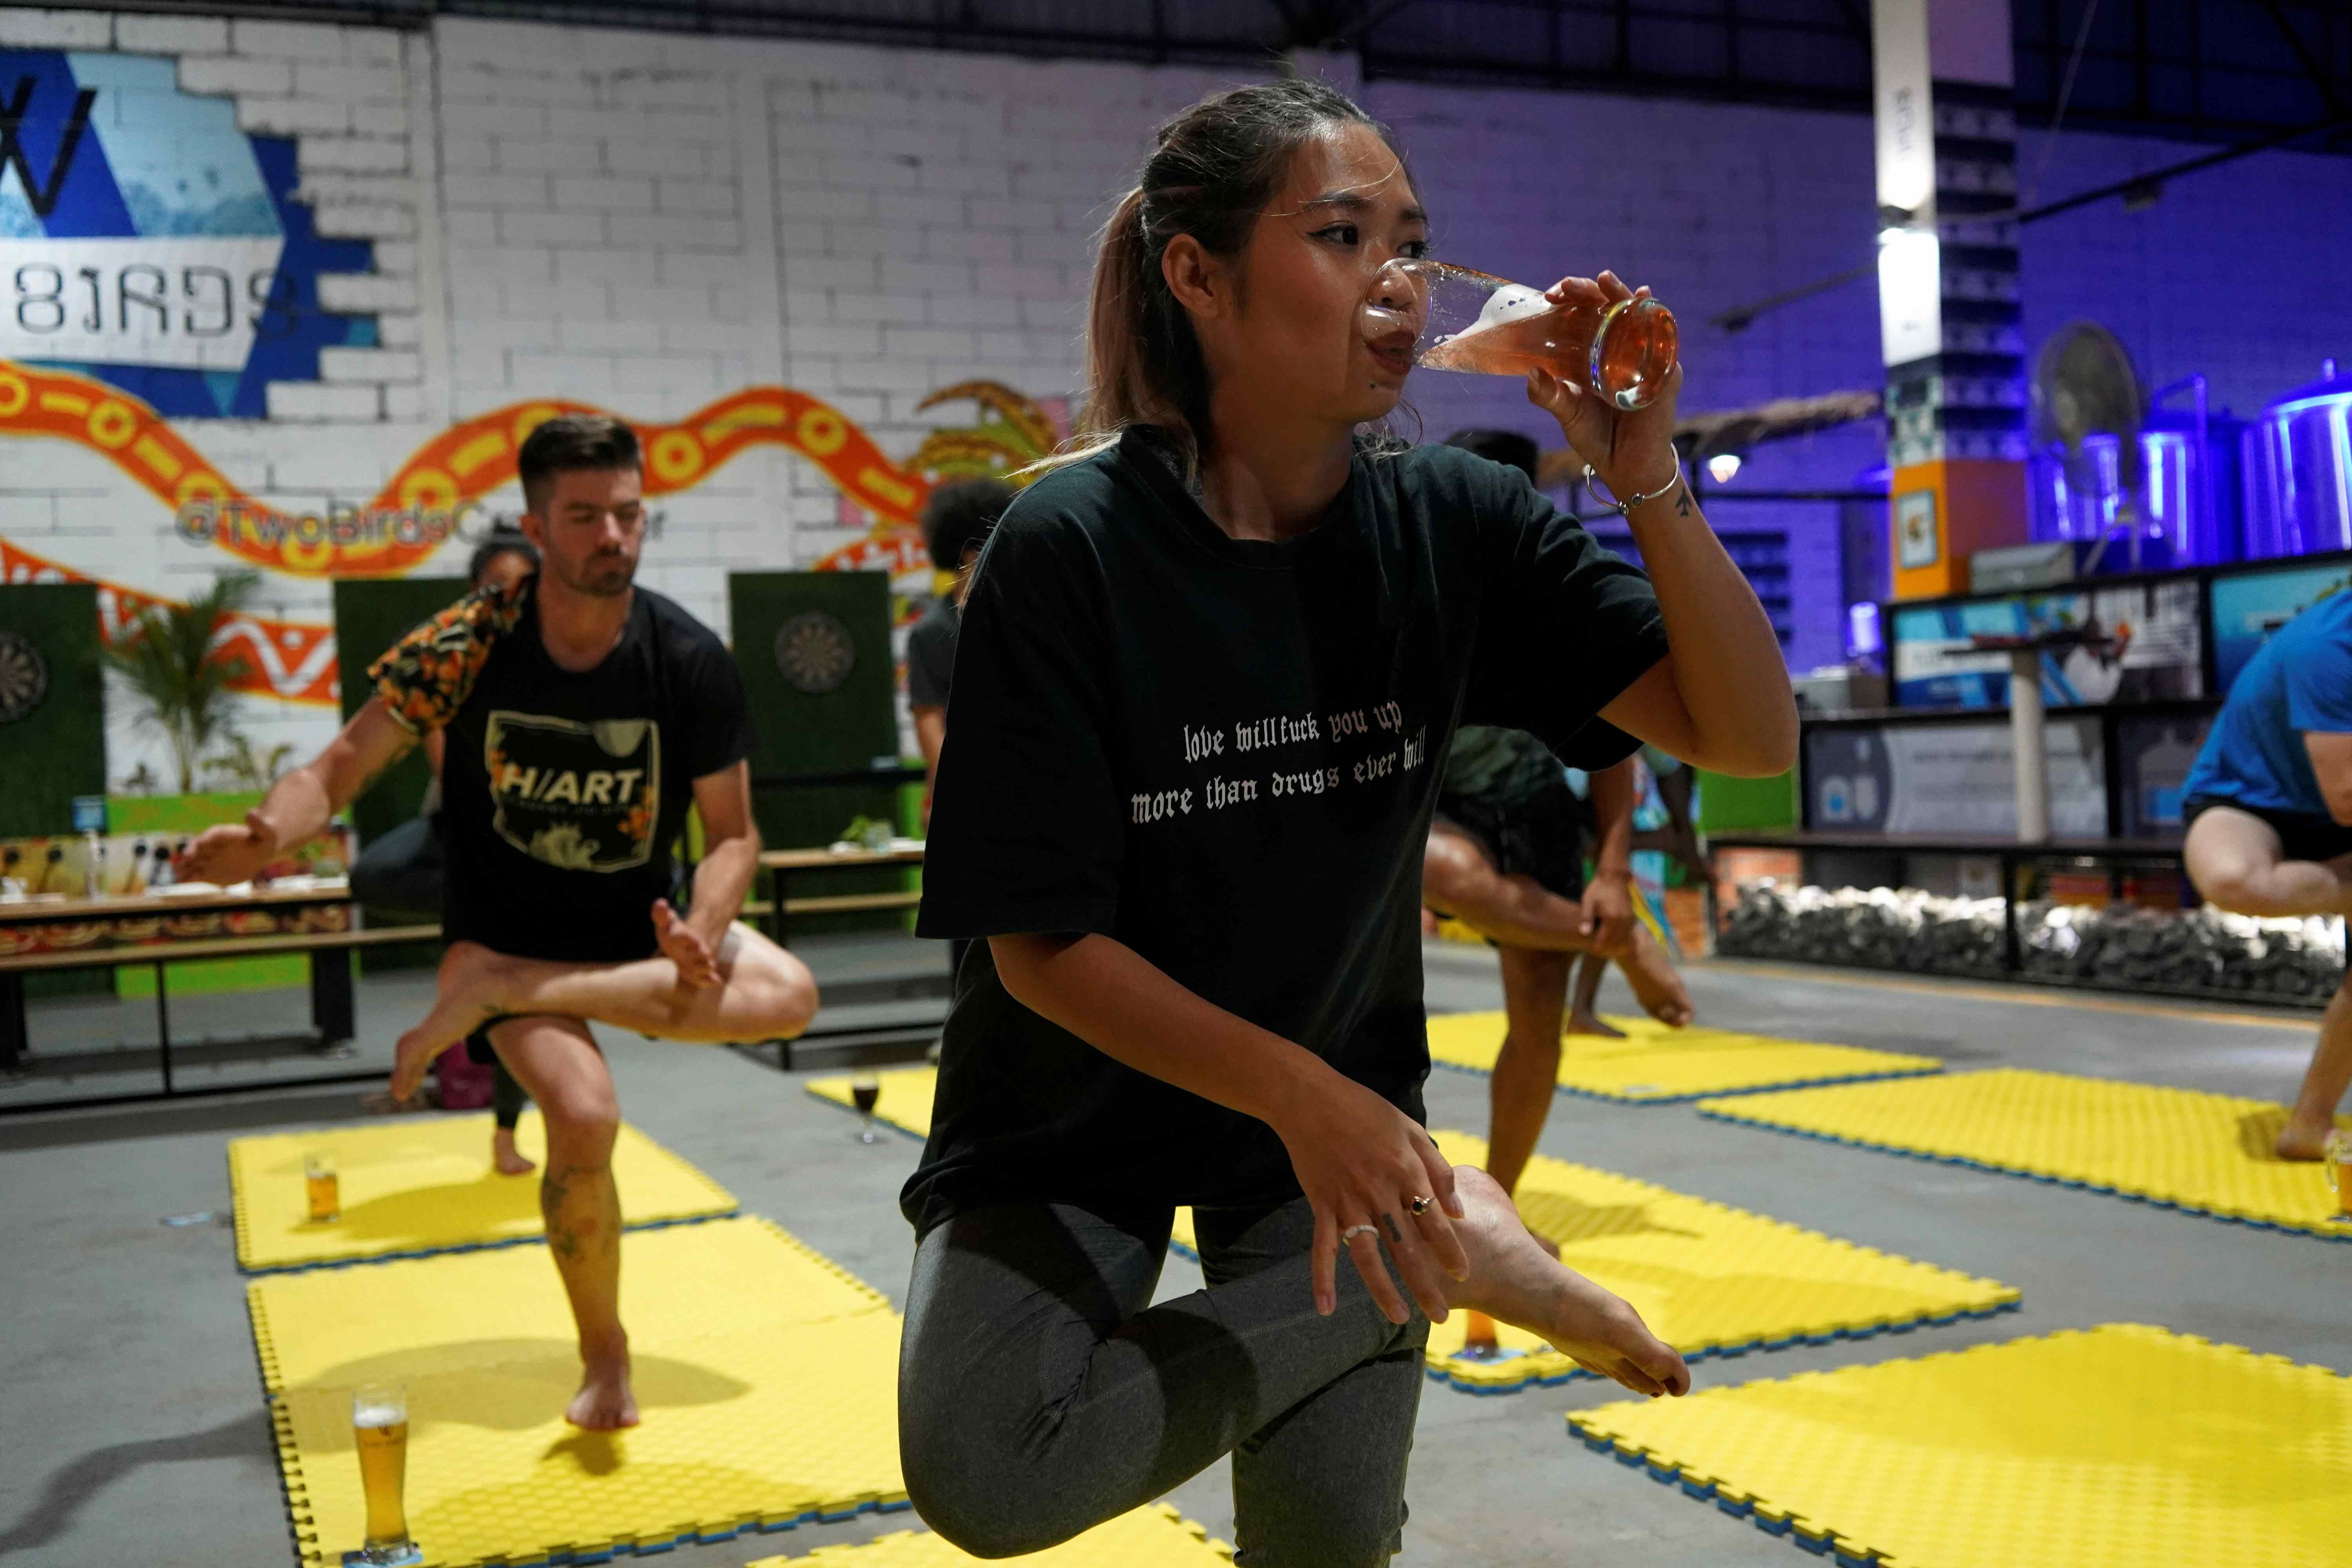 Yoga fans return to mat after lockdown – with a beer